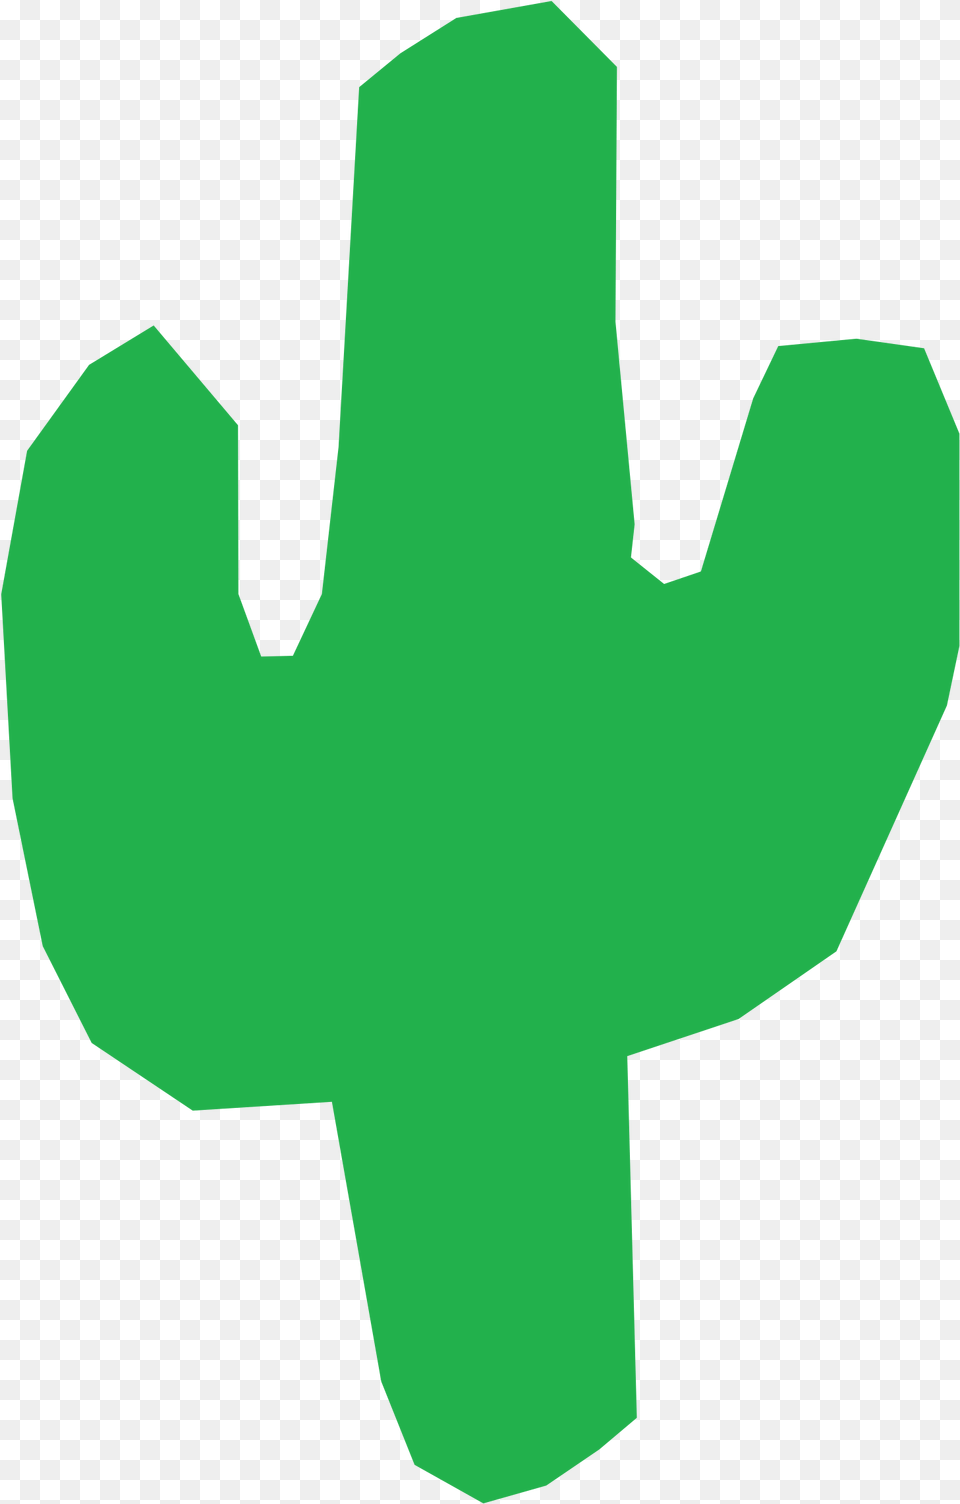 This Free Icons Design Of Cactus Refixed, Clothing, Glove, Symbol Png